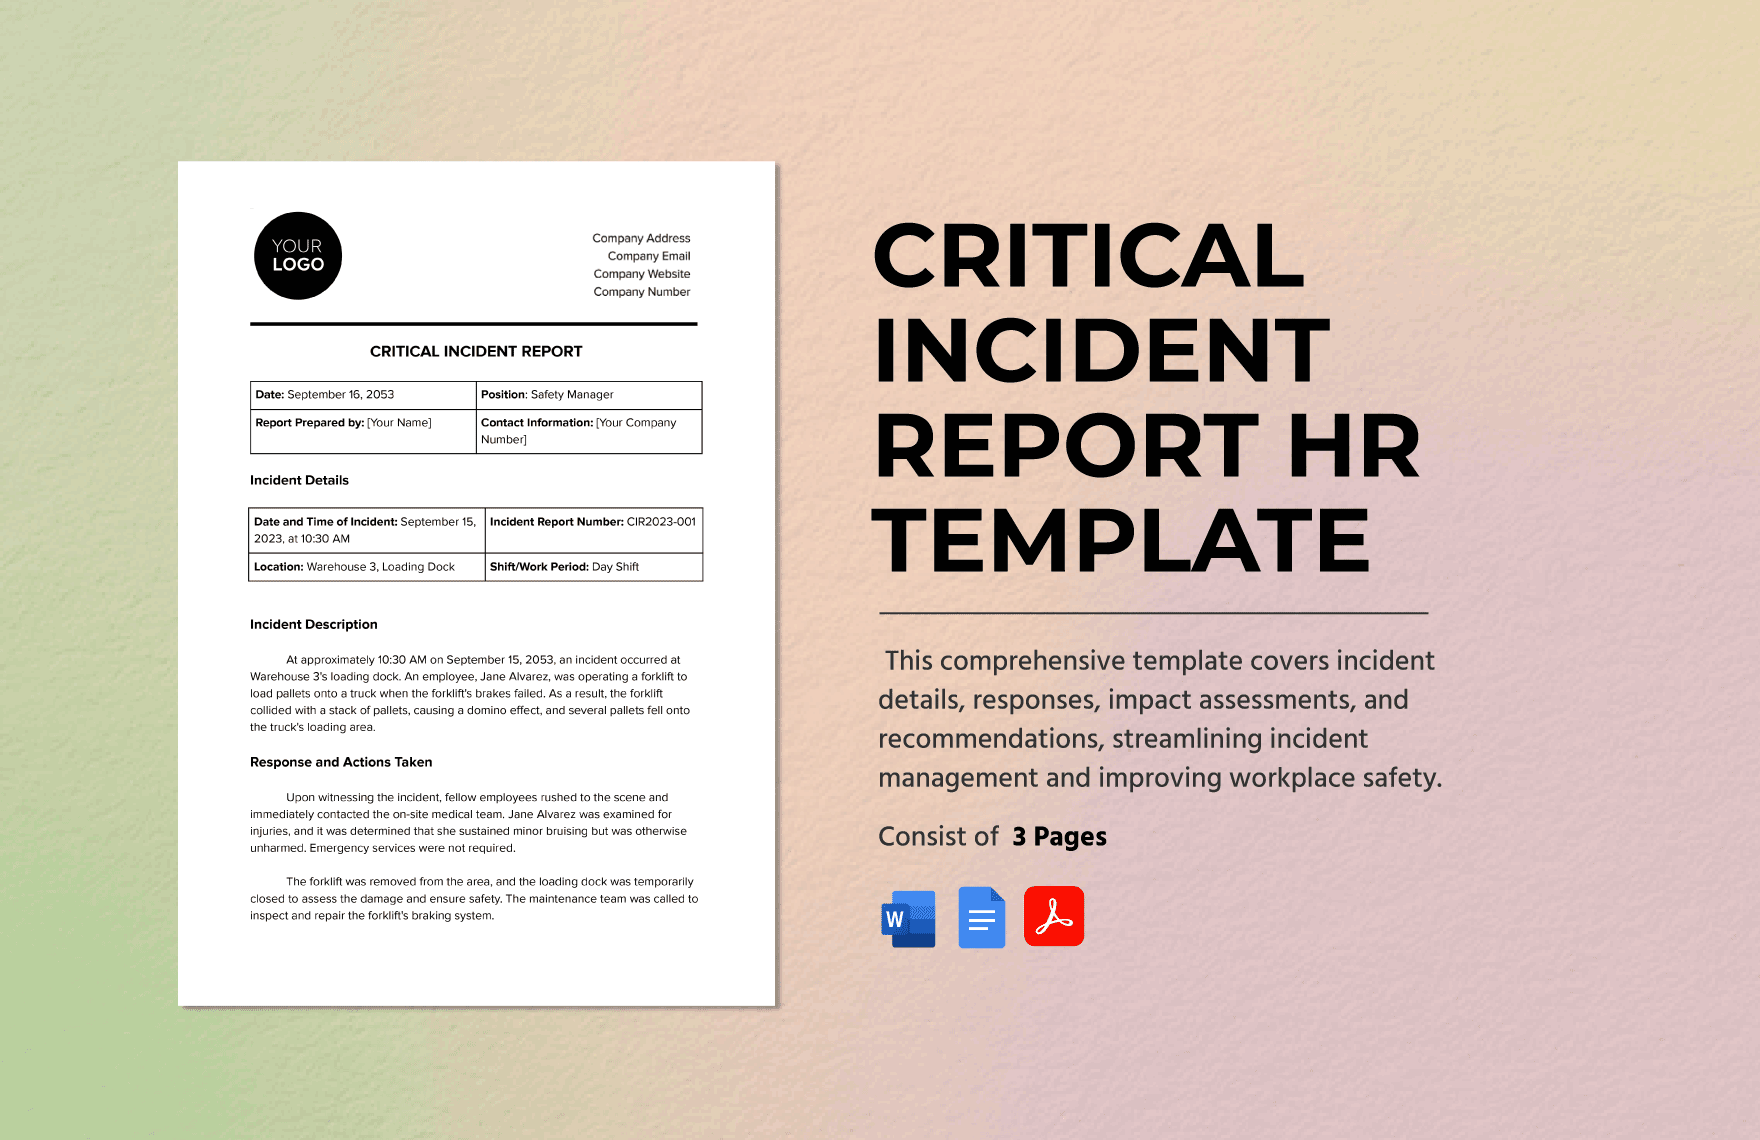 Critical Incident Report HR Template